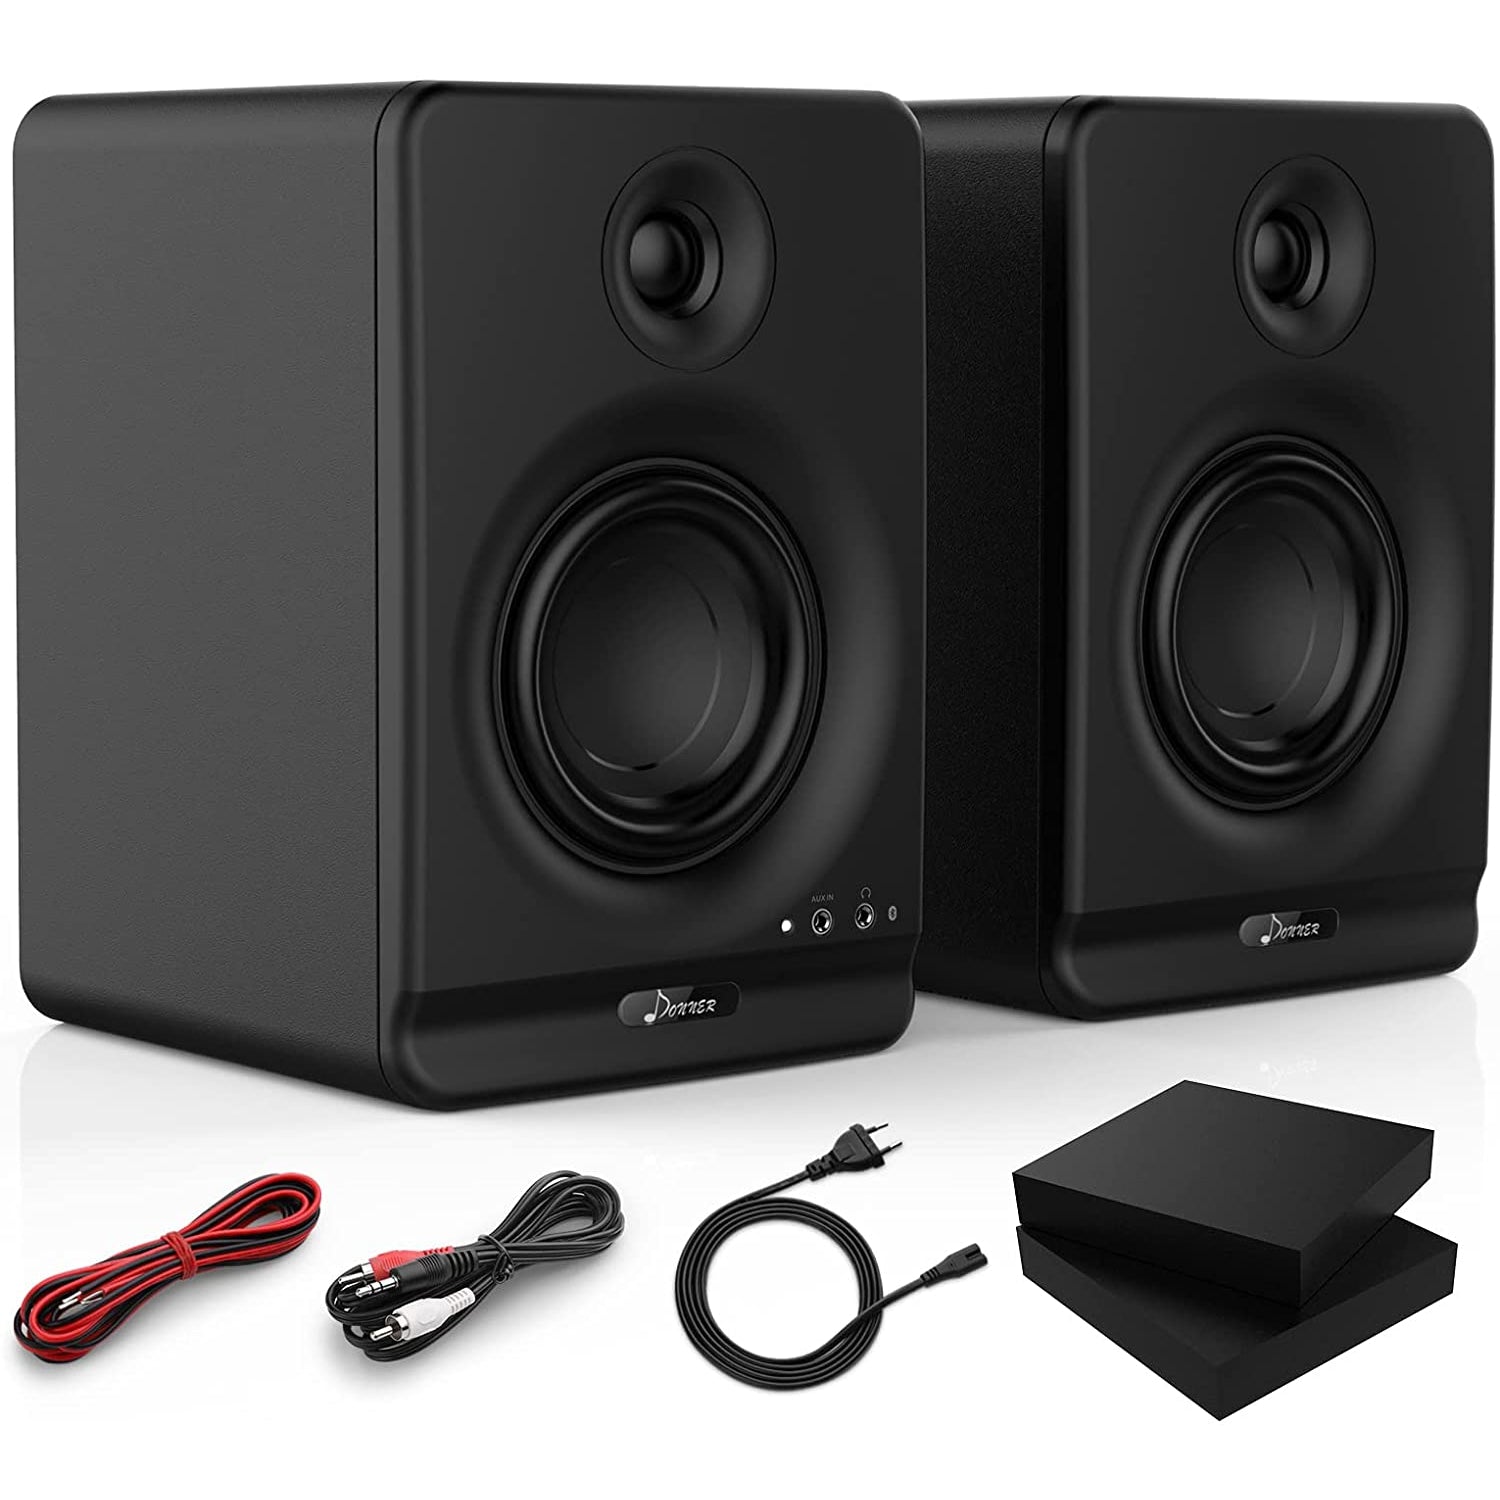 Donner DYNA 4 - 4" Active Monitor Speakers with Professional CSR Bluetooth 5.0 - Black